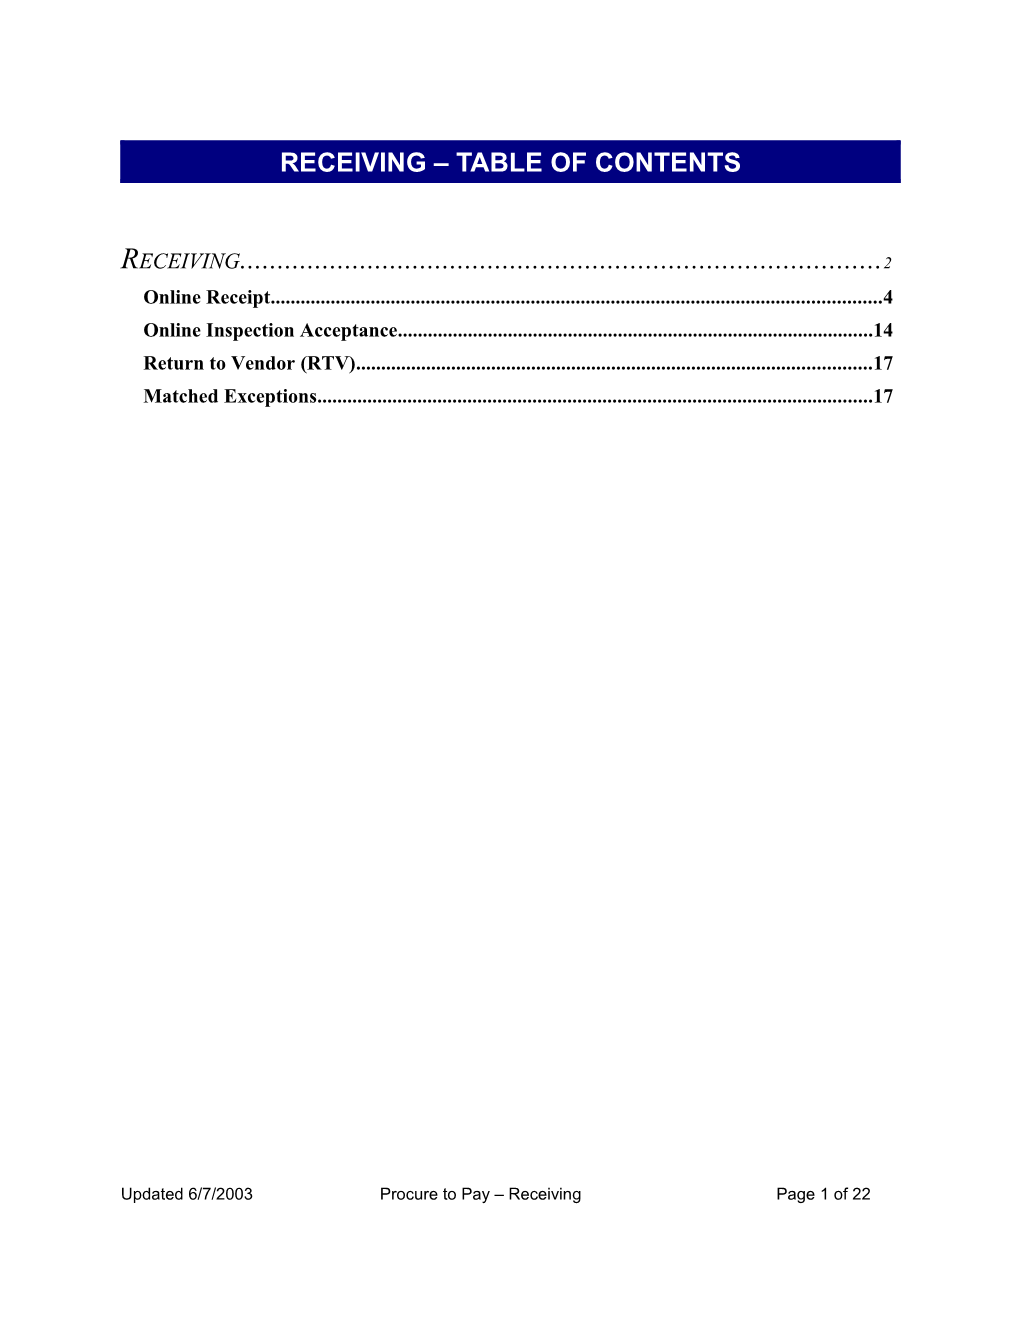 Receiving Table of Contents